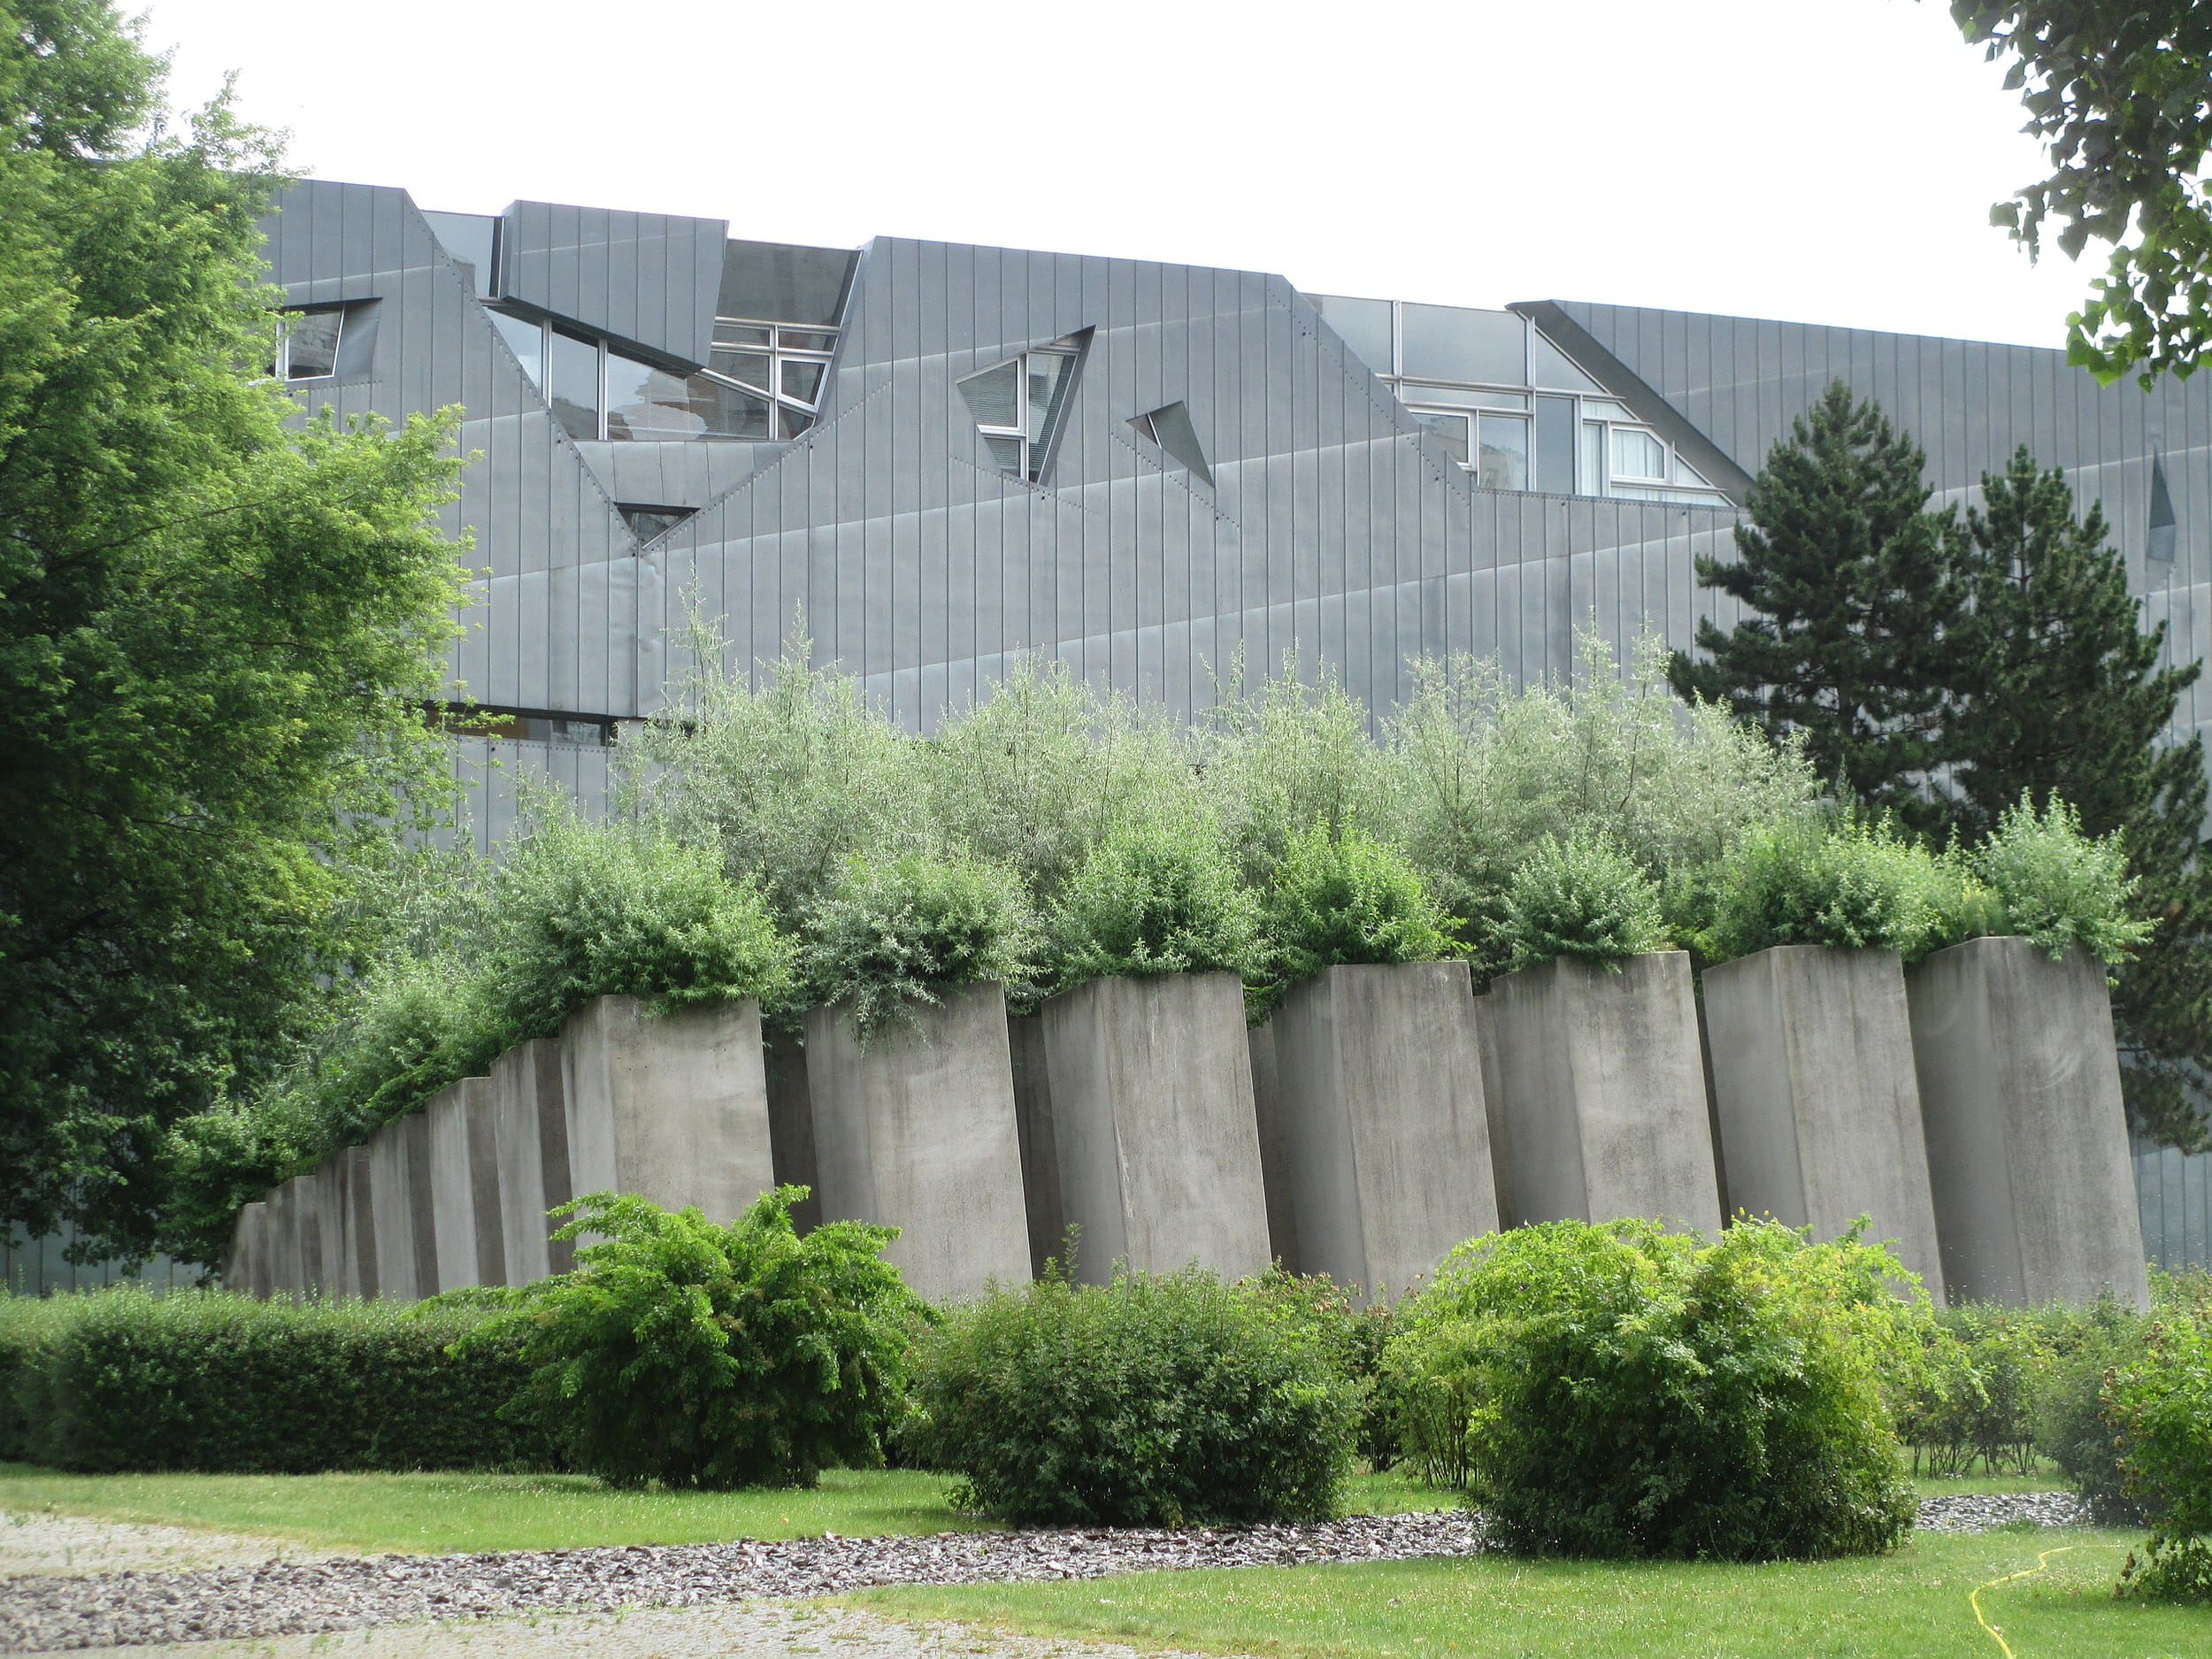 The zinc-clad Jewish Museum sits behind the Garden of Exile in Berlin, Germany.